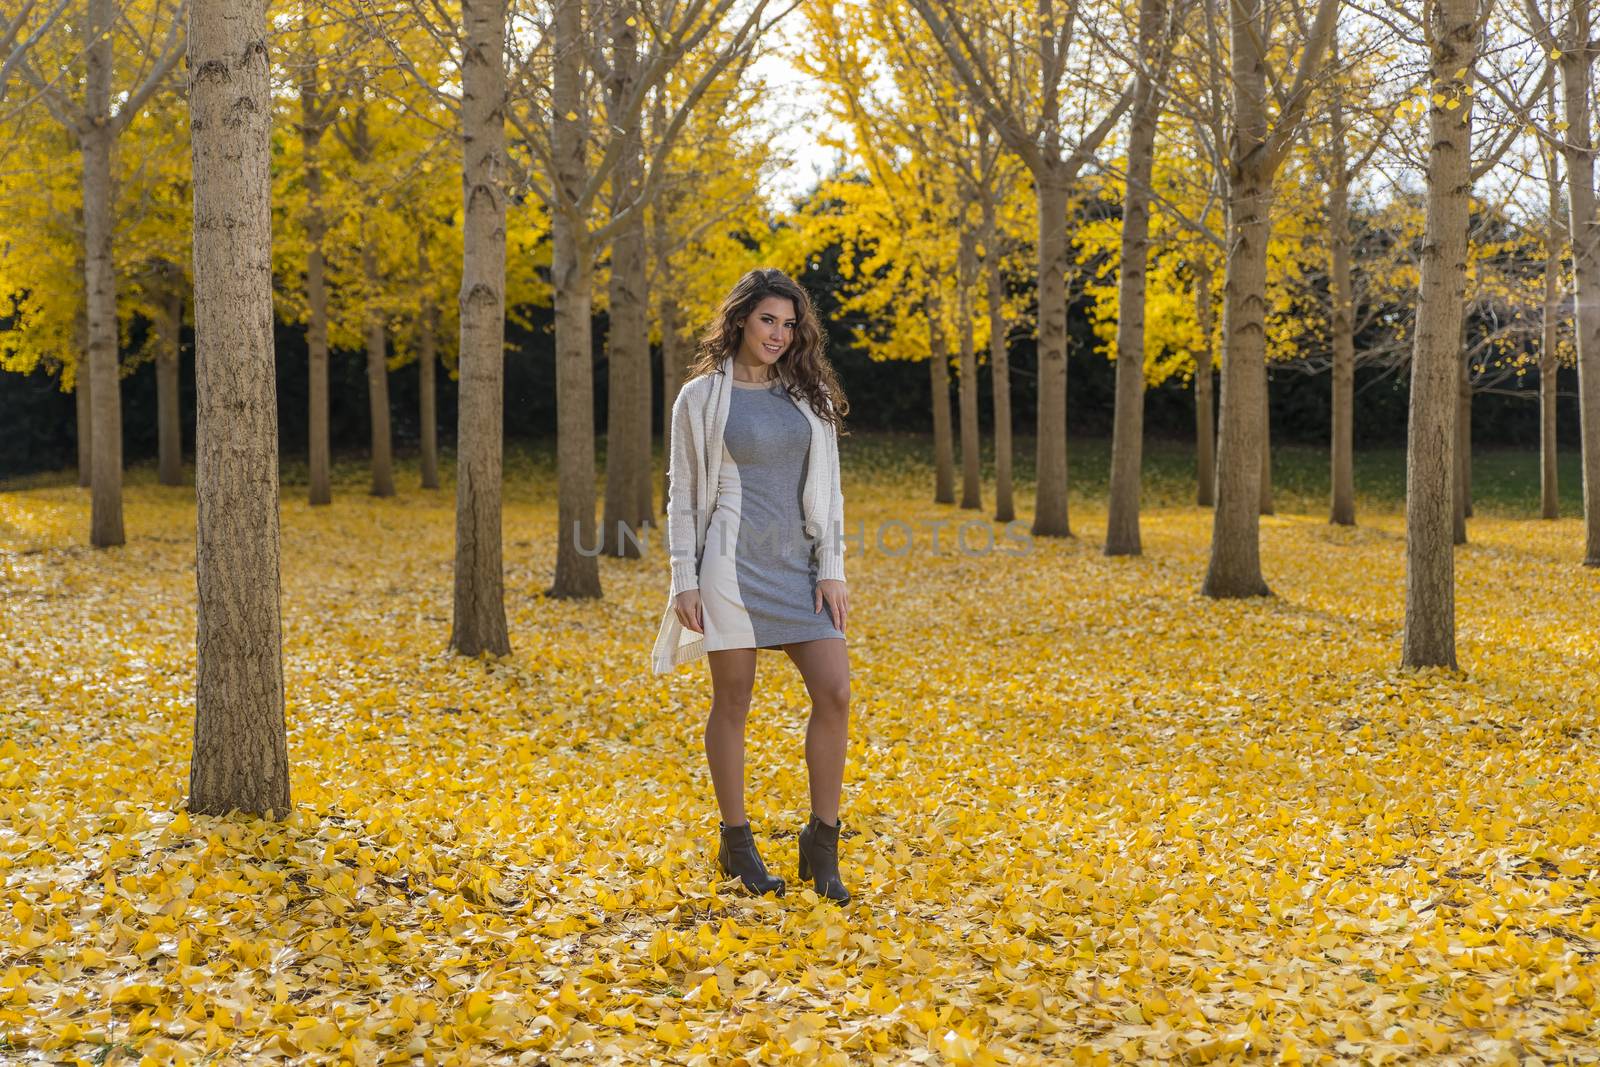 Brunette Model In Fall Foliage by actionsports